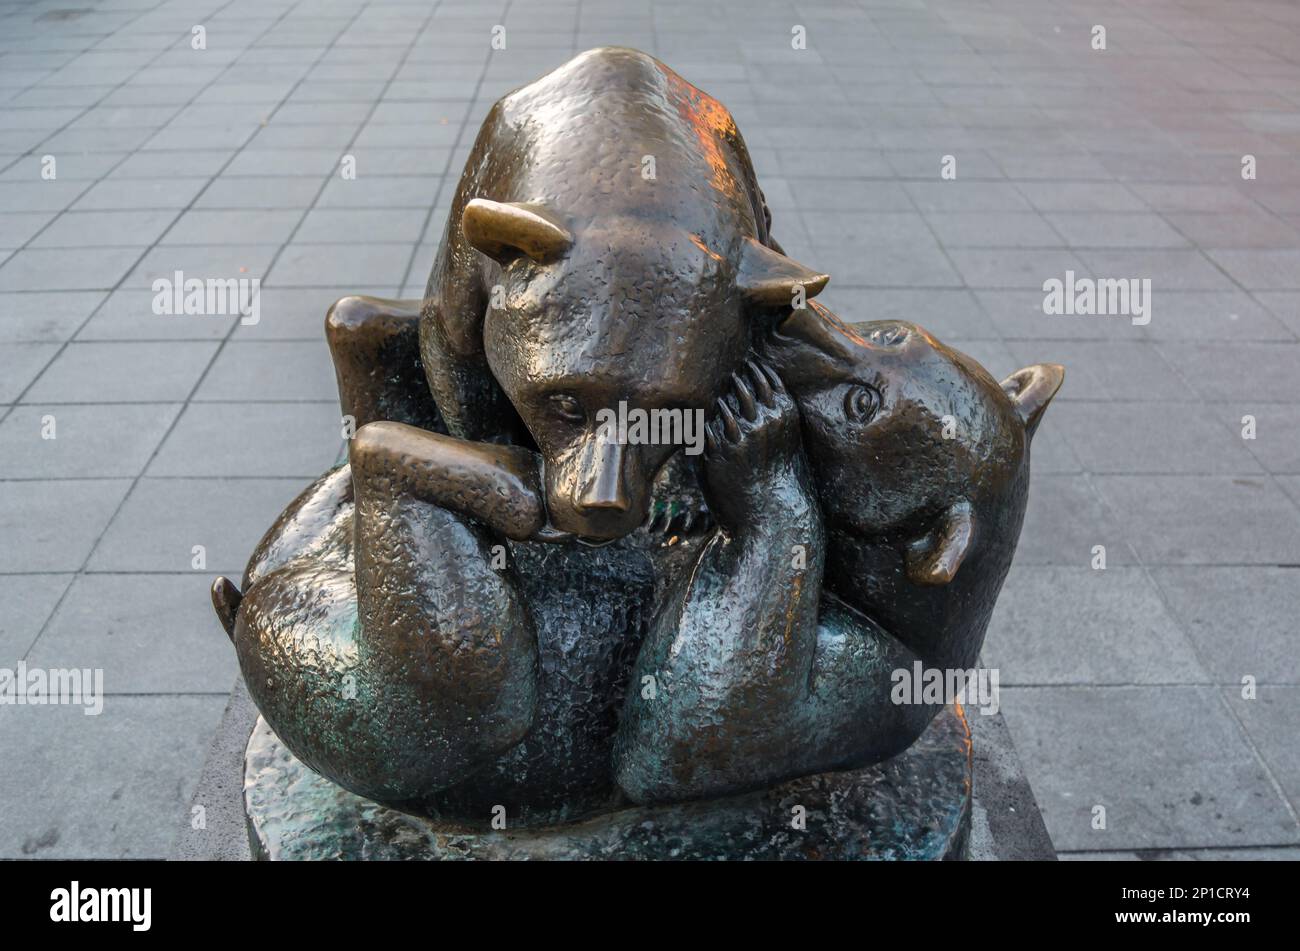 ROTTERDAM, THE NETHERLANDS - AUGUST 26, 2013: Bronze statue entitled 'Playing Bears' located on the Lijnbaan, a shopping street in the center of Rotte Stock Photo